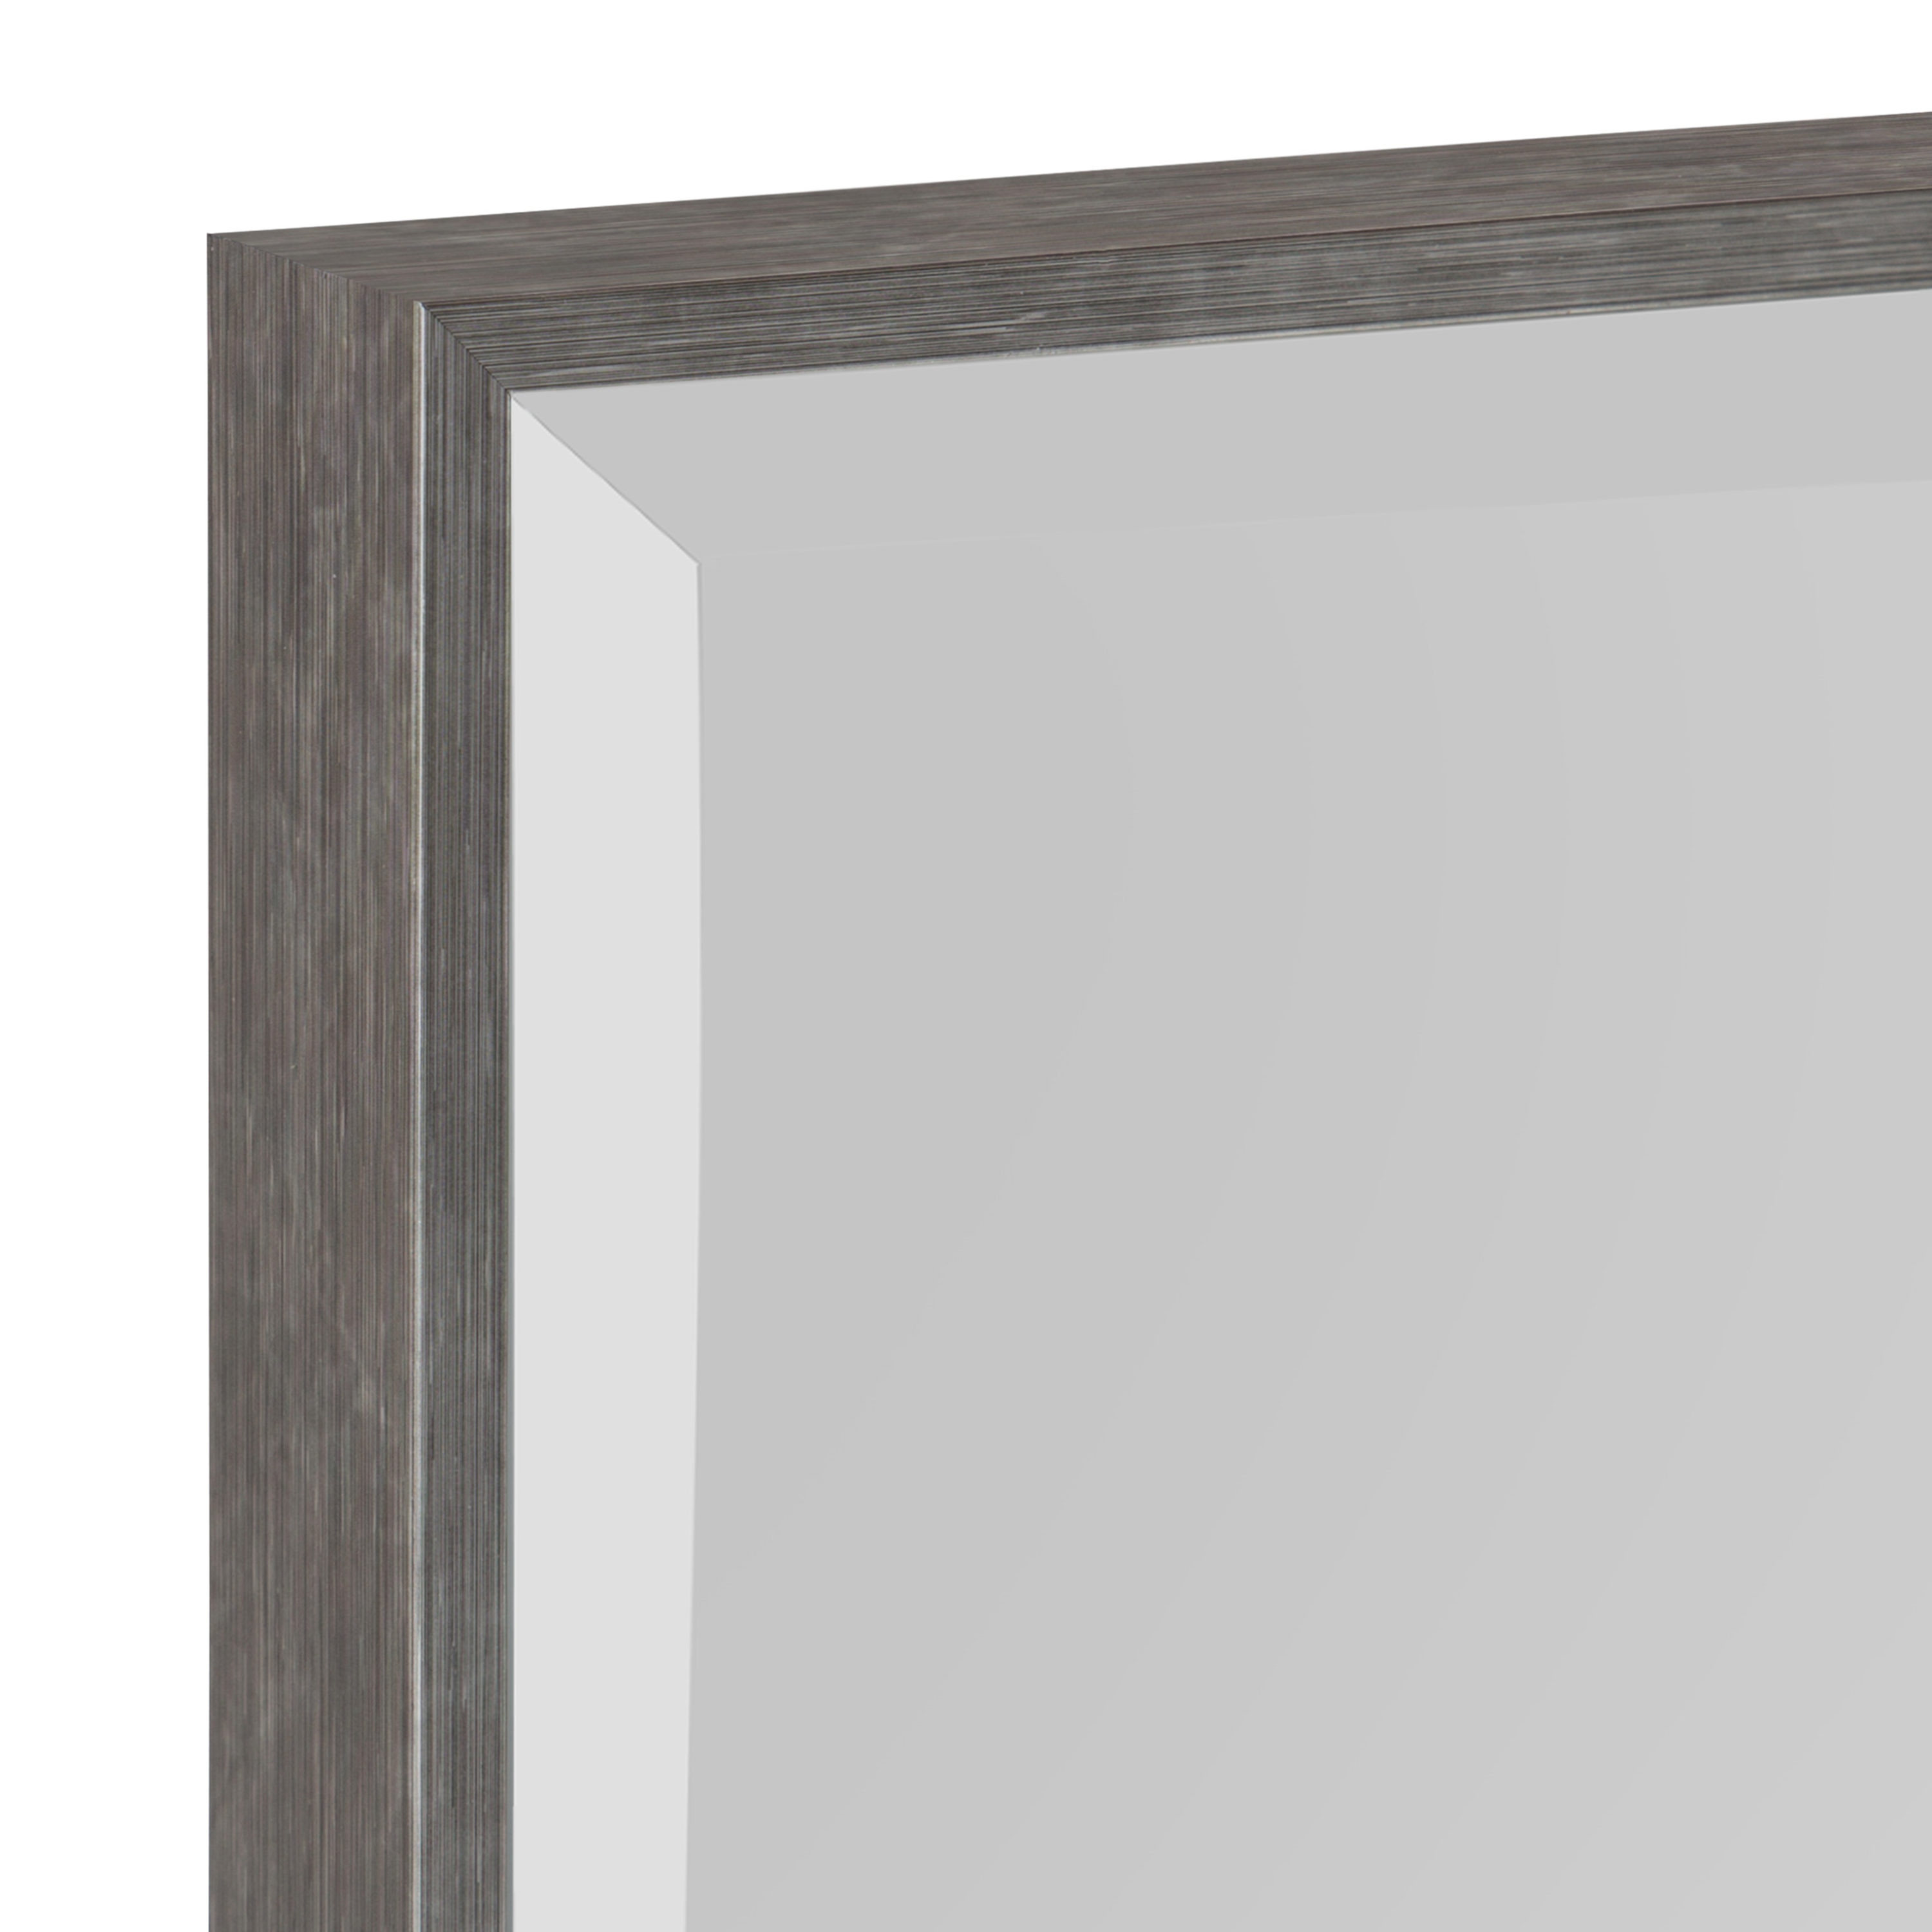 Kate and Laurel Rhodes 24.75-in W x 36.75-in H Dark Silver Beveled Wall ...